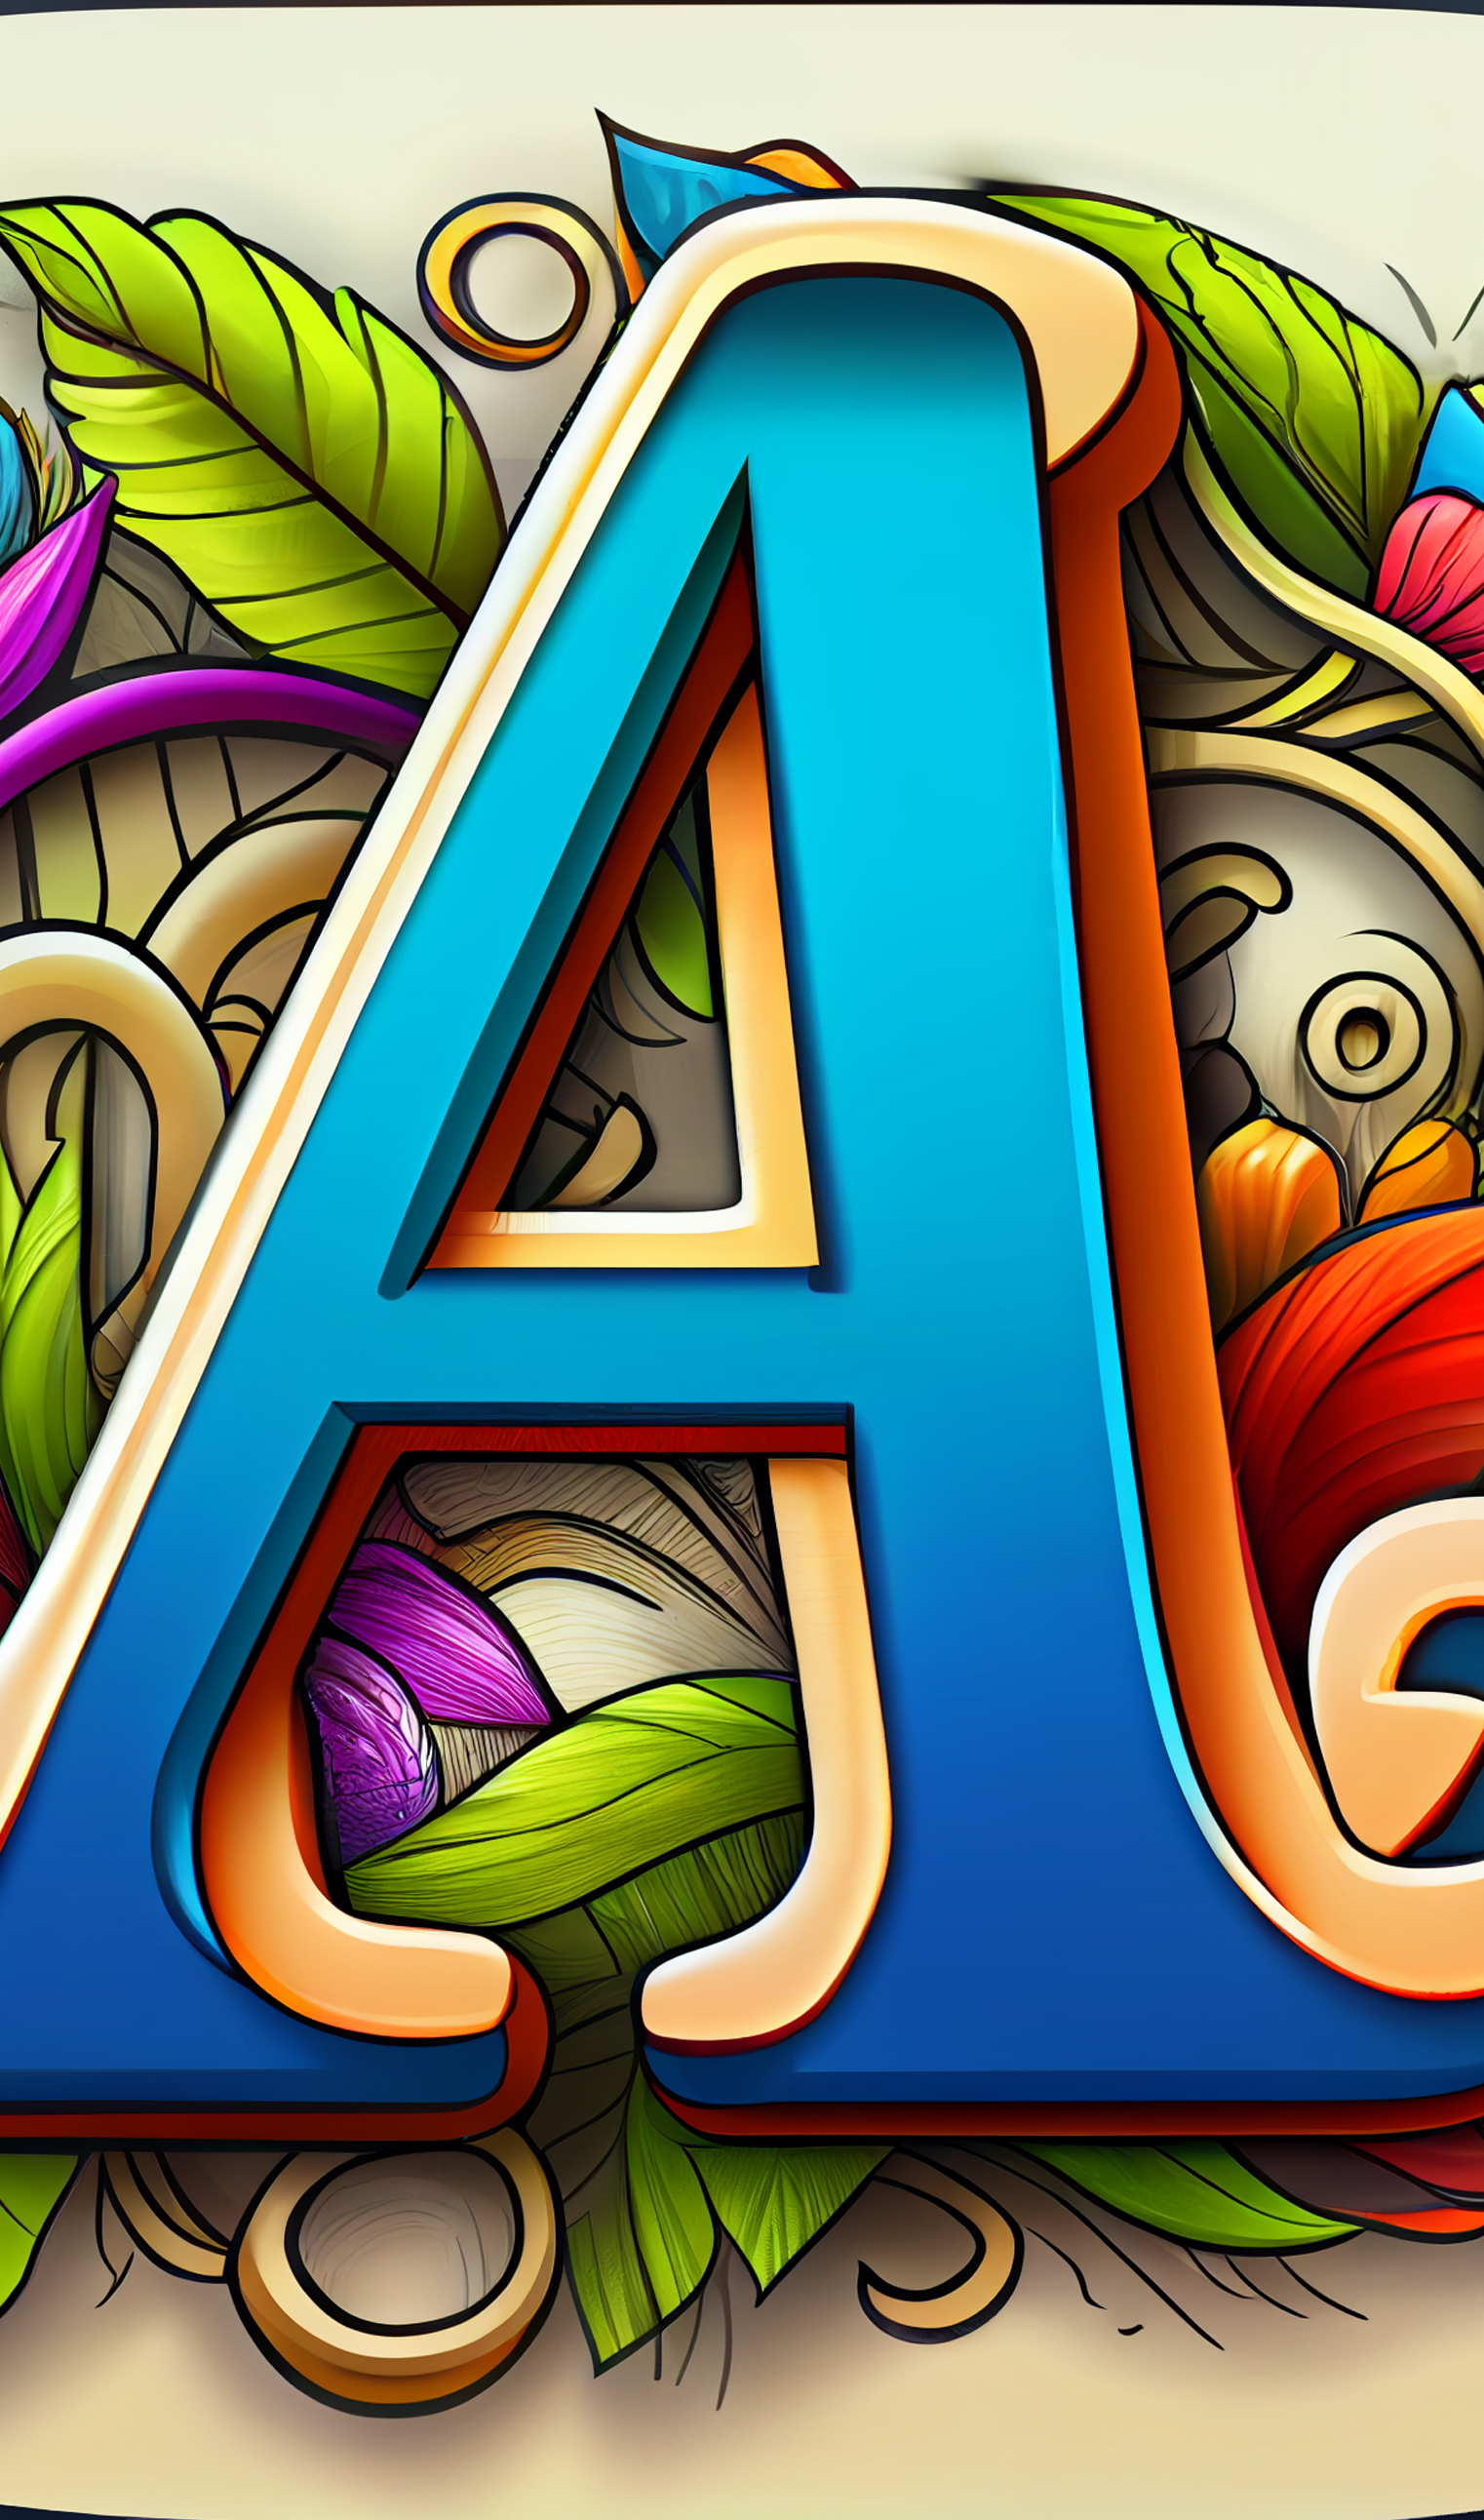 Alphabets Lore Coloring Book Apk Download for Android- Latest